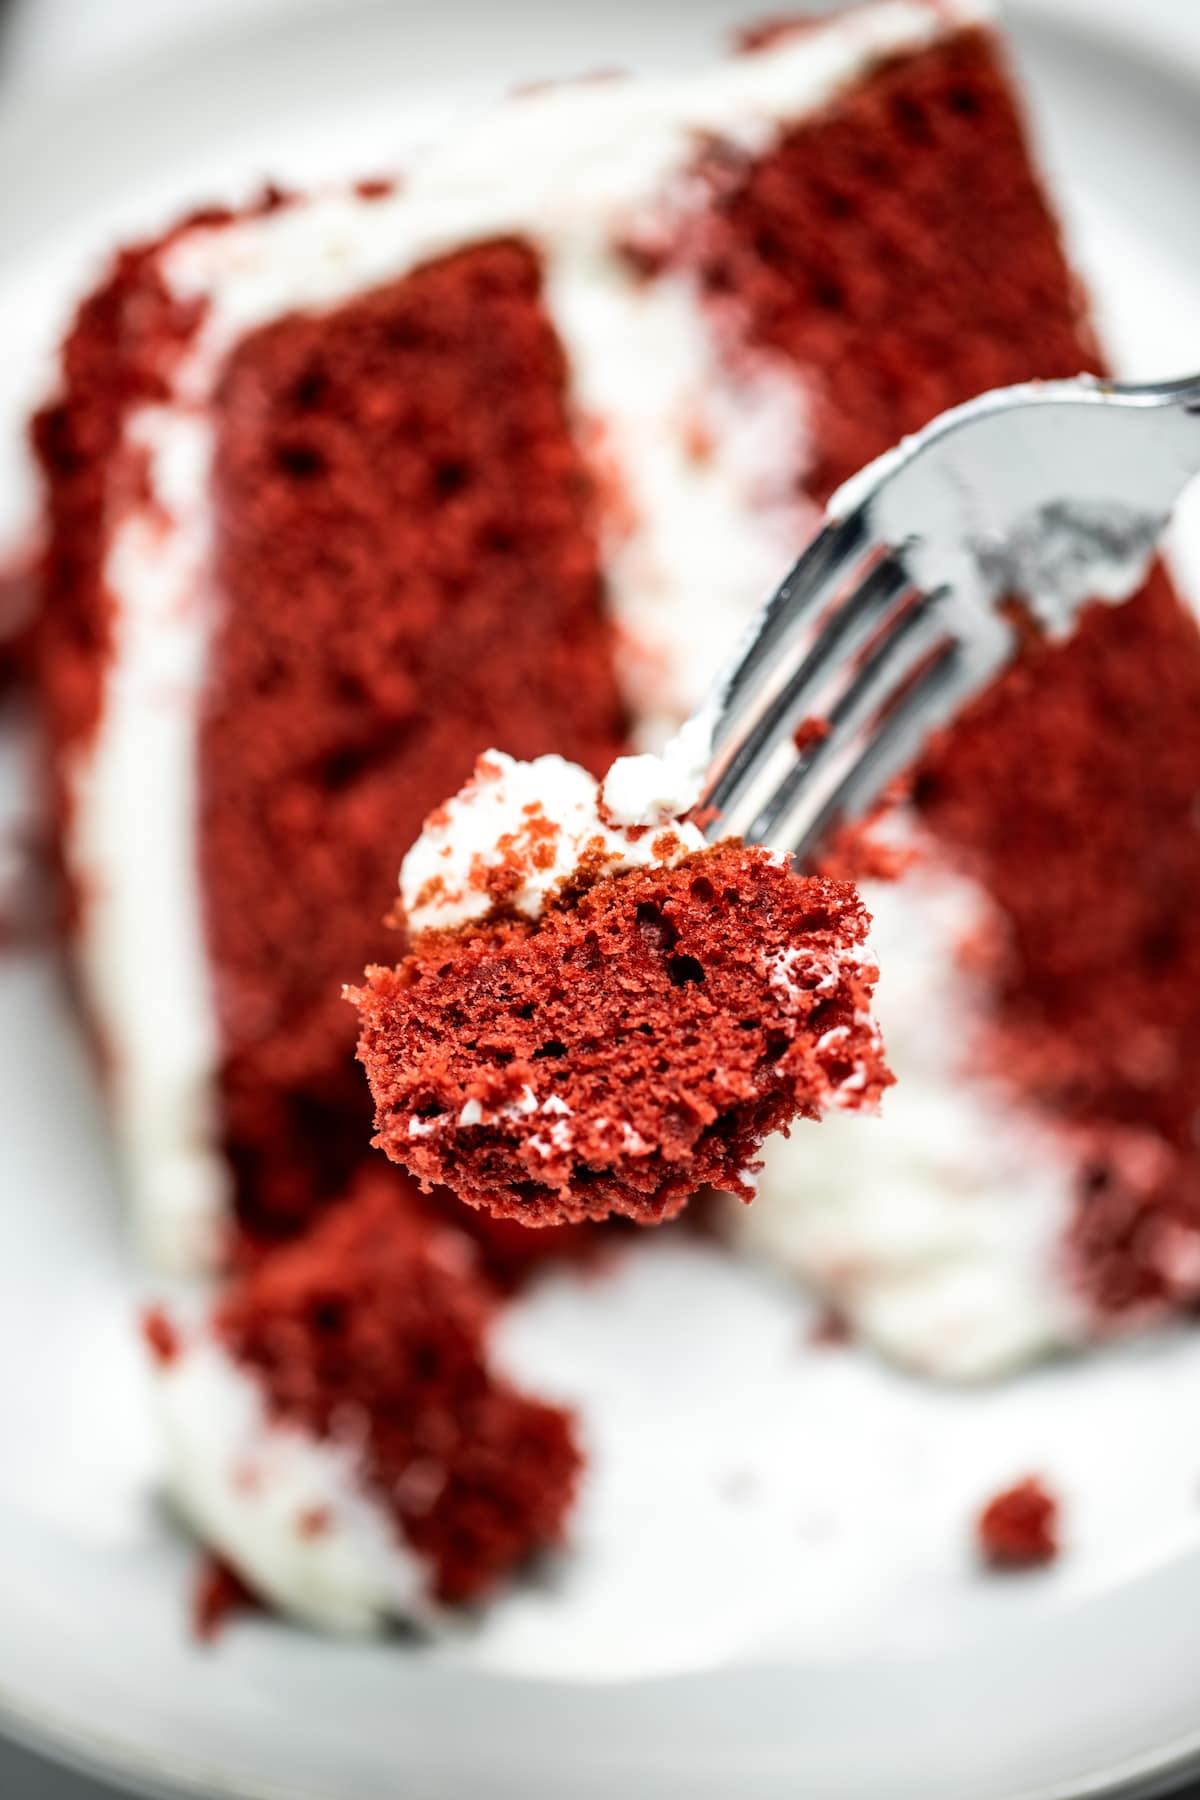 A closeup of a fork with a piece of red velvet cake, with a piece of cake on a plate in the background.